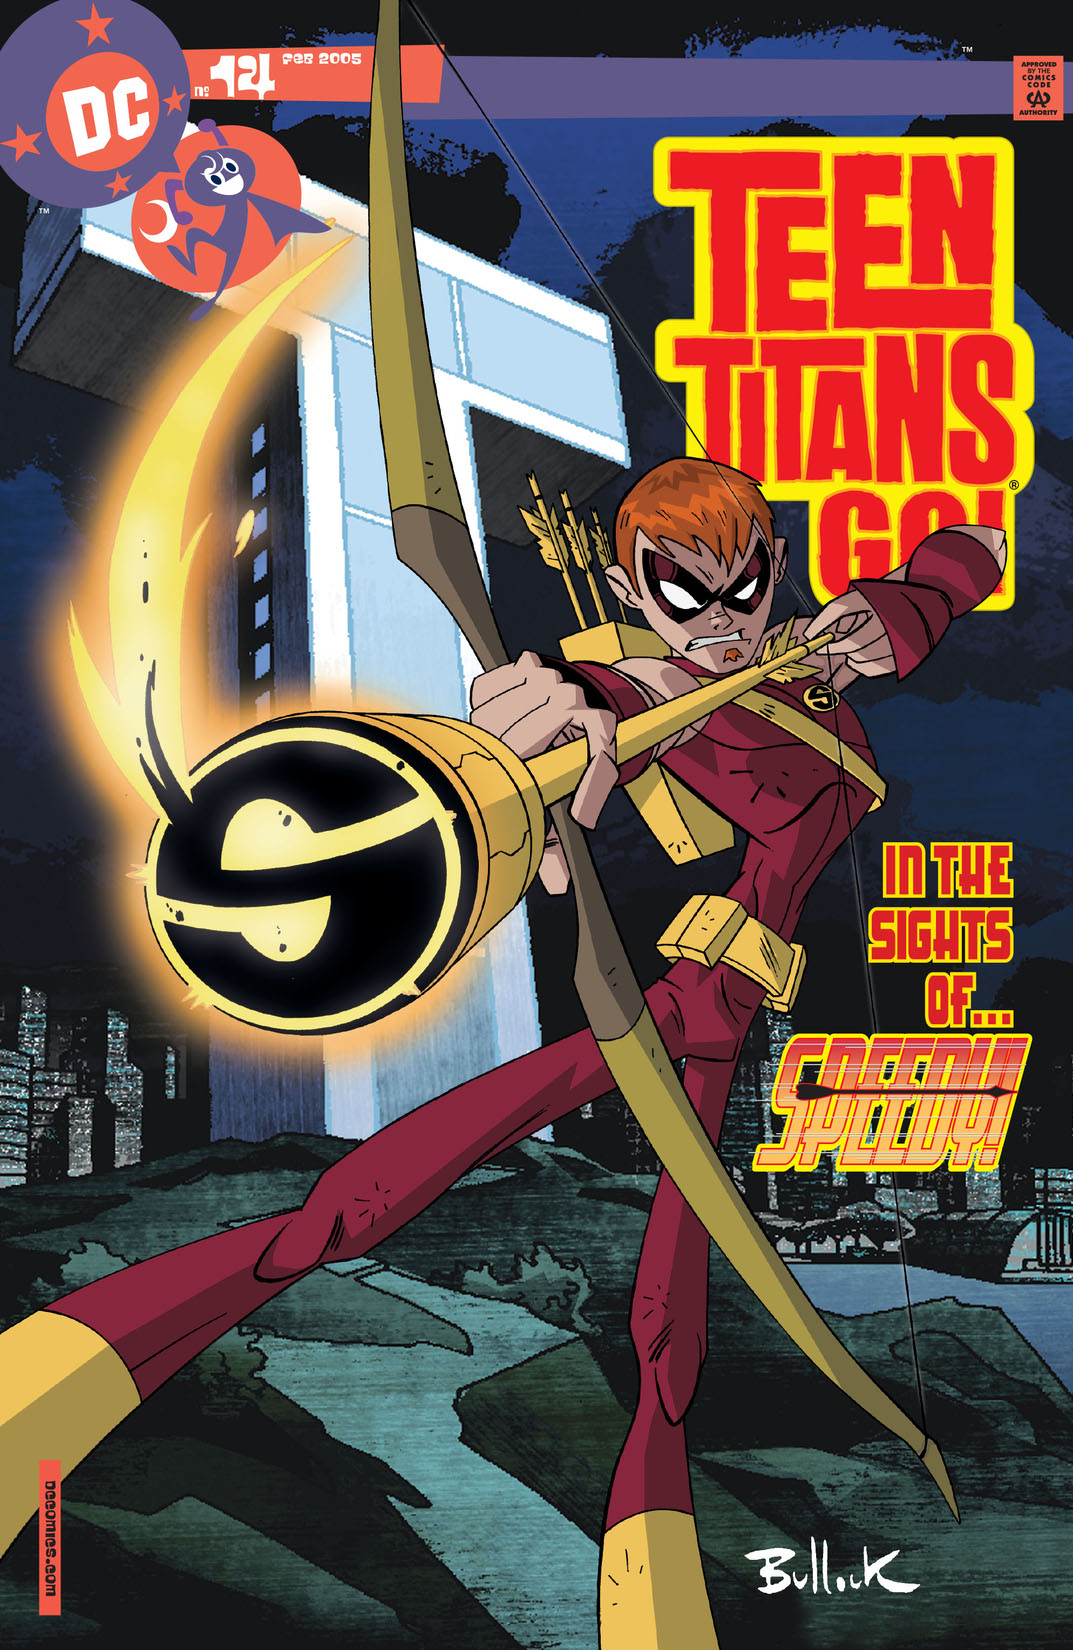 Teen Titans Go! (2003-) #14 preview images